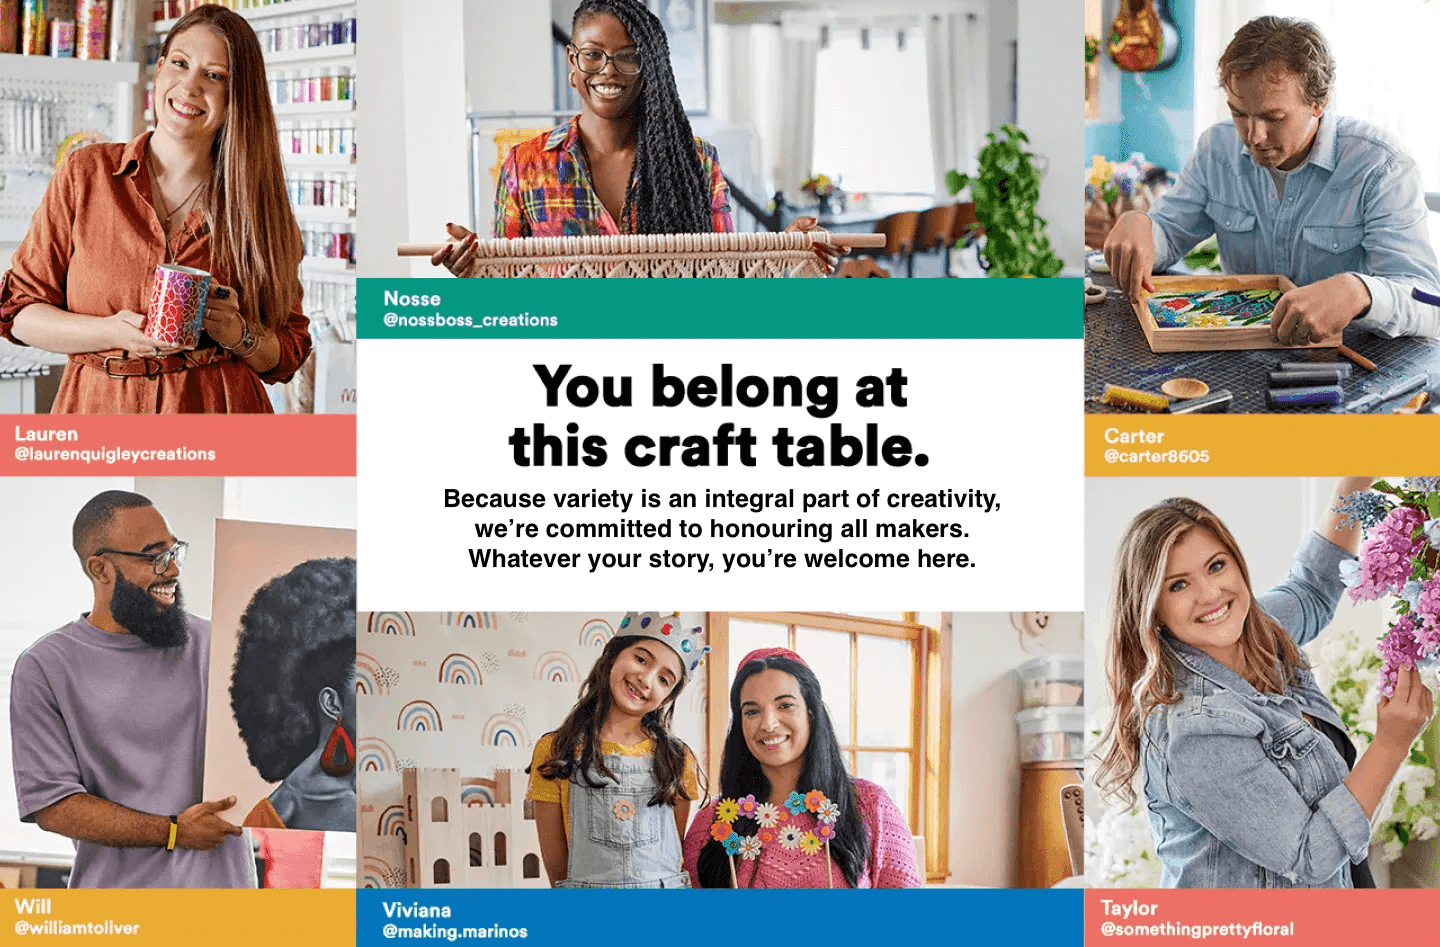 You belong at this craft table. Because variety is an integral part of creativity, we're committed to honouring all makers. Whatever your story, you're welcome here.